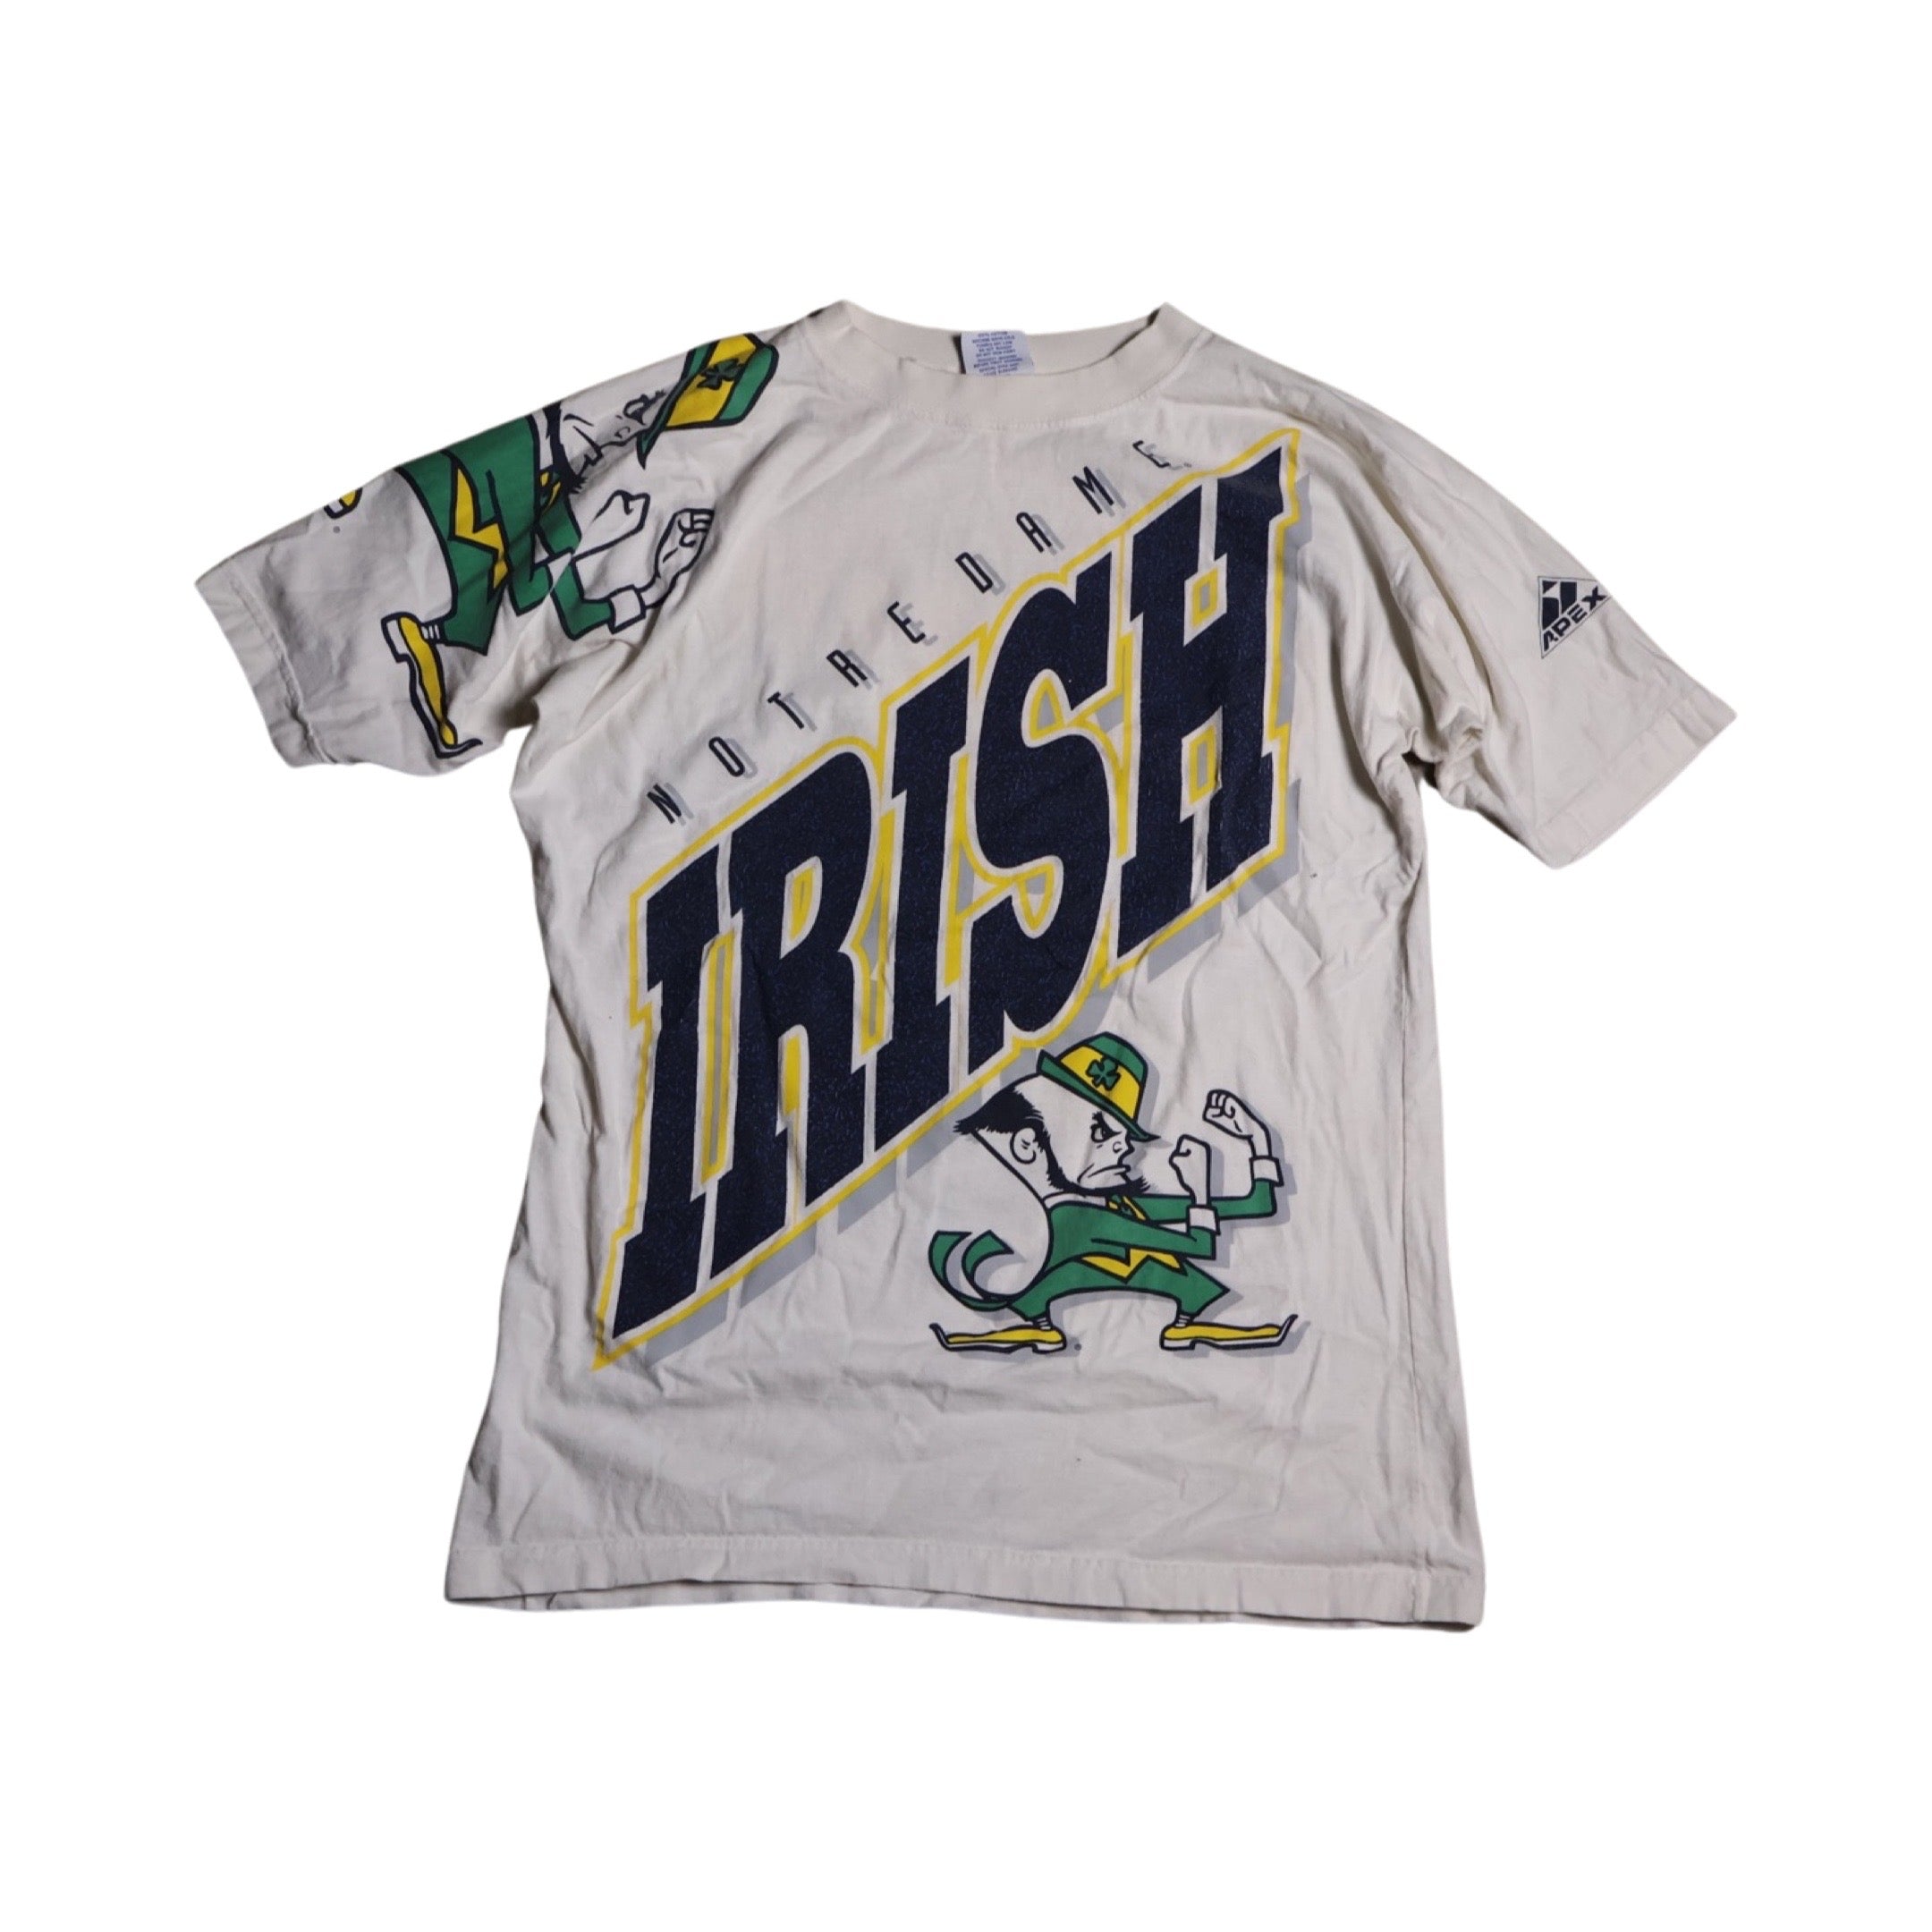 Notre Dame All-Over Print 90s T-Shirt Grail (Large)